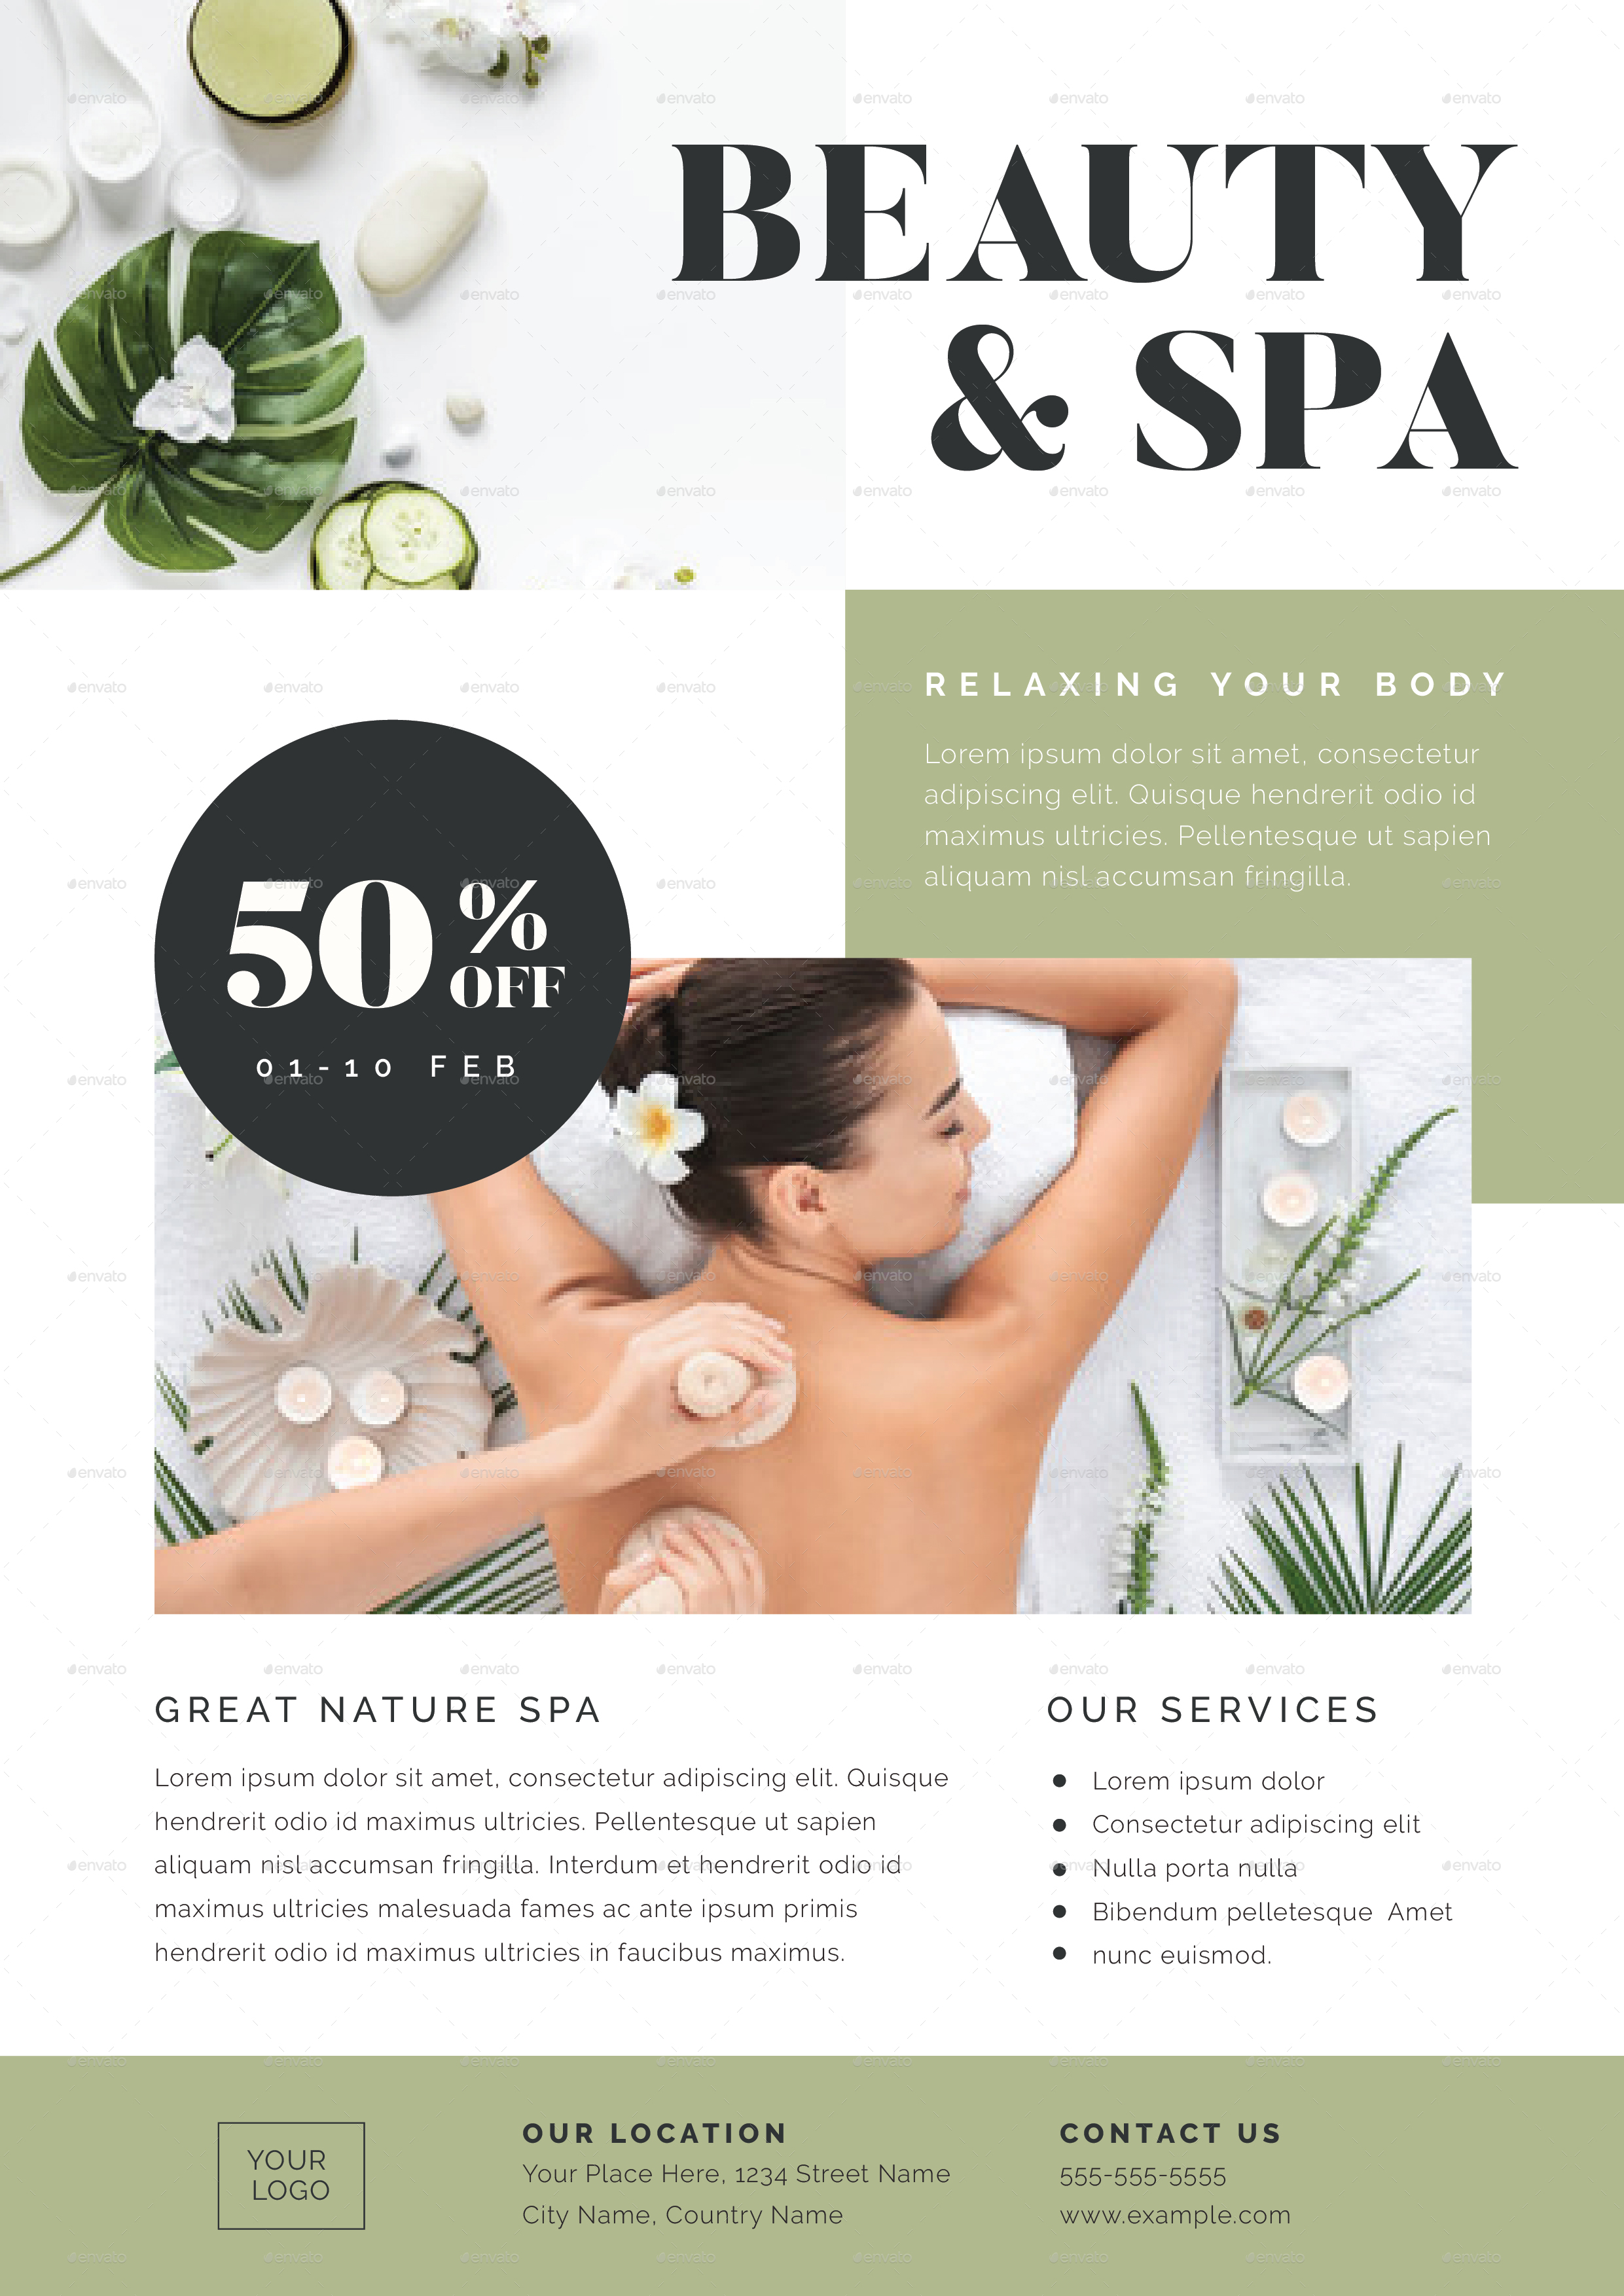 Beauty & Spa Flyer by GraphicRiver